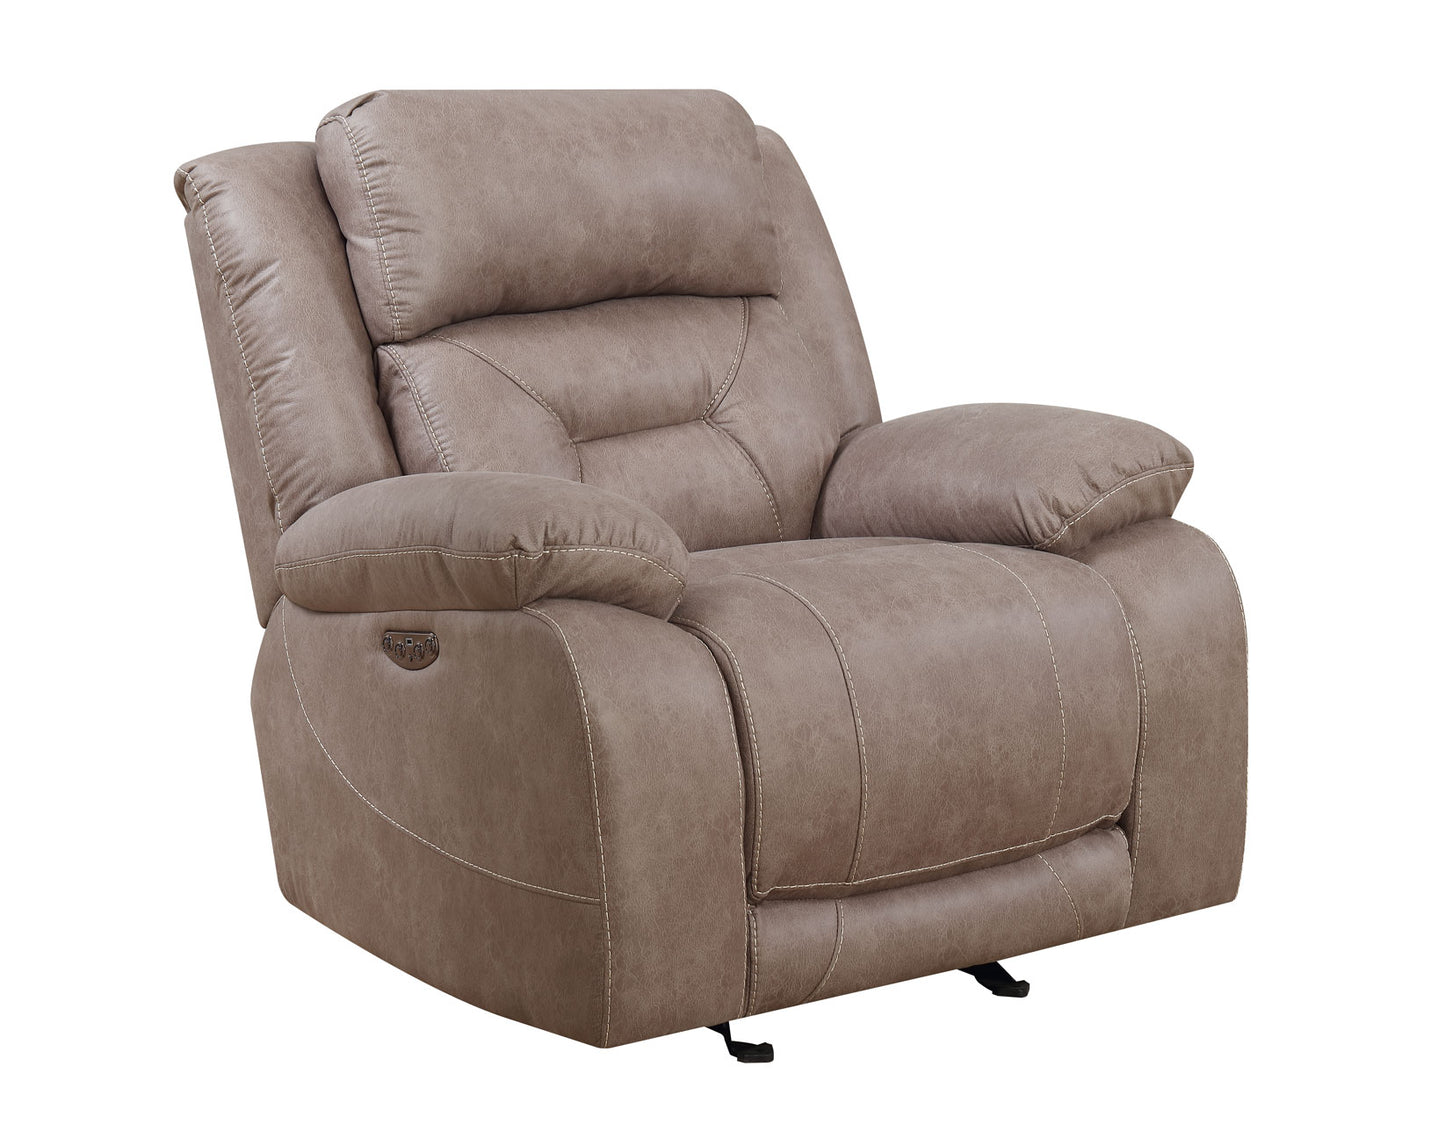 WEEKLY or MONTHLY. Ariana Desert Sand Double Power Recliner